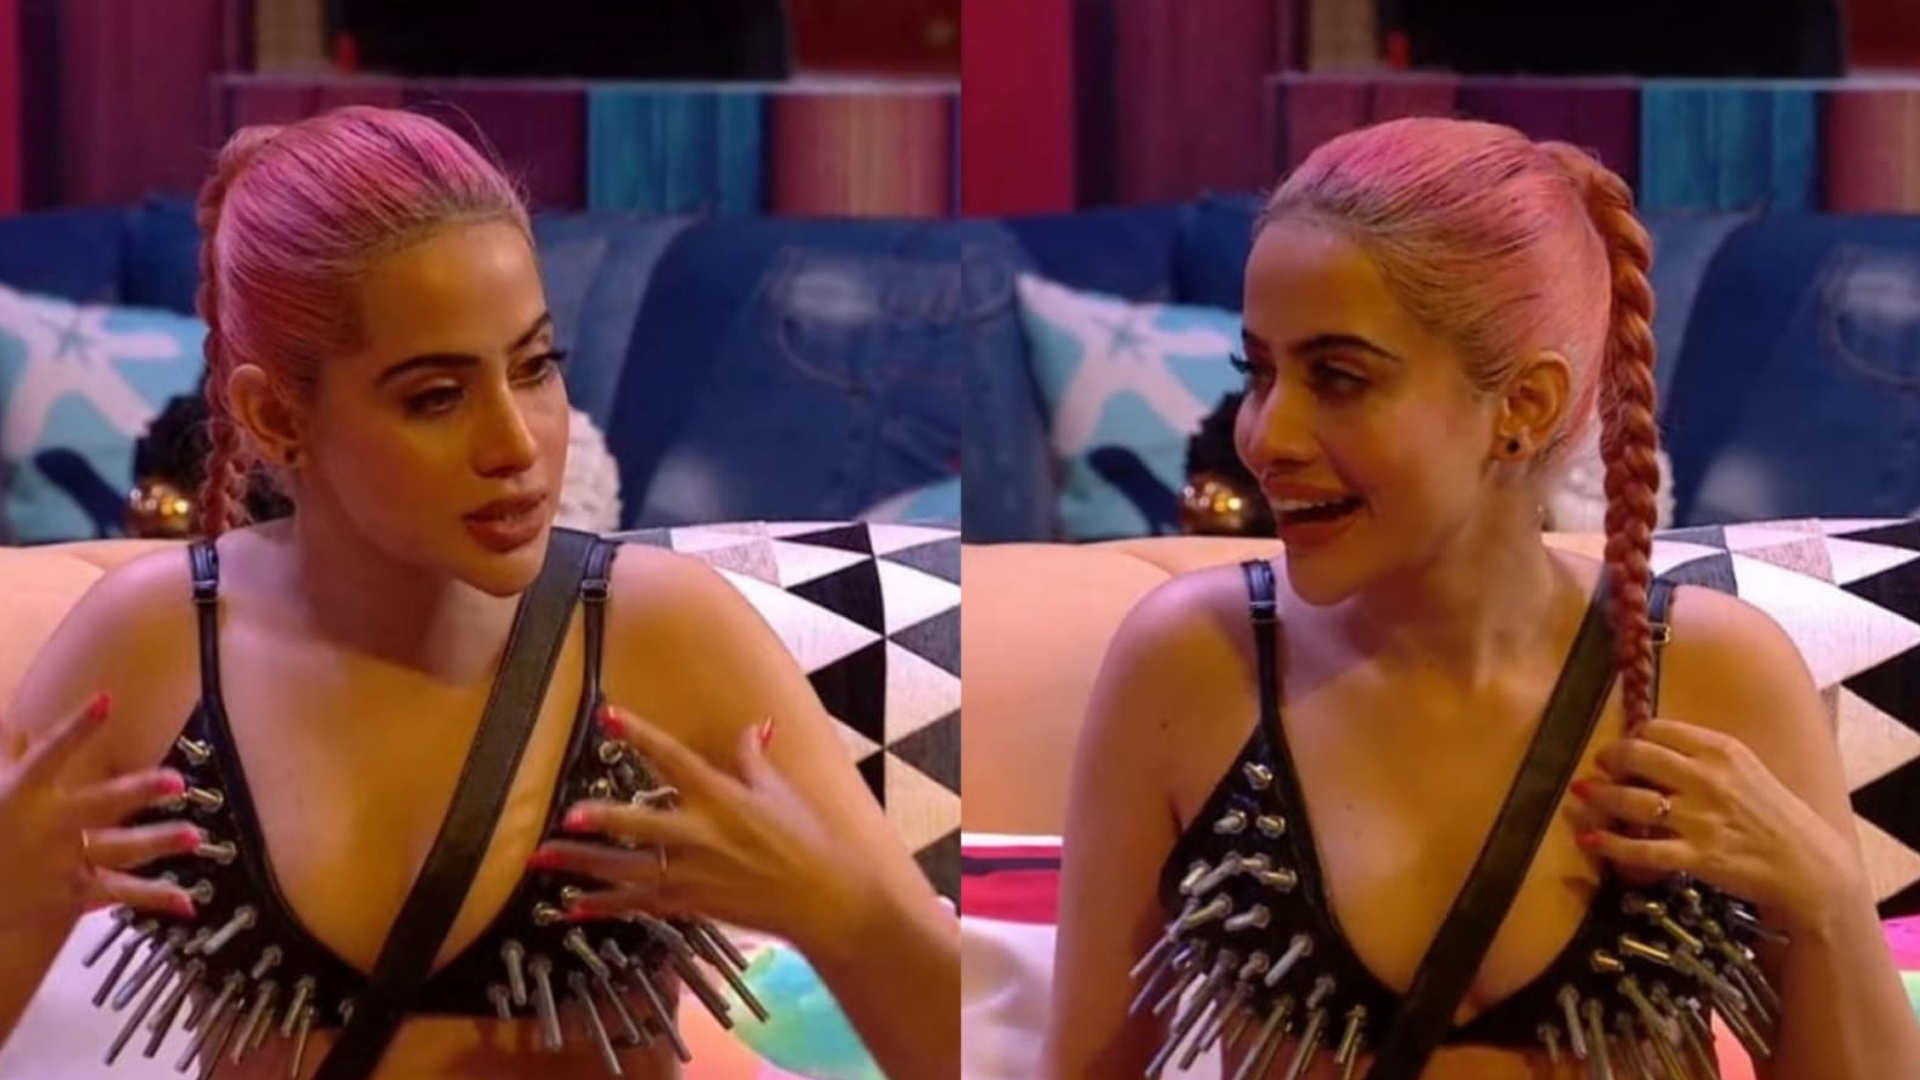 “Uorfi Javed Claims Bigg Boss Theme is Inspired by Her Unique Style